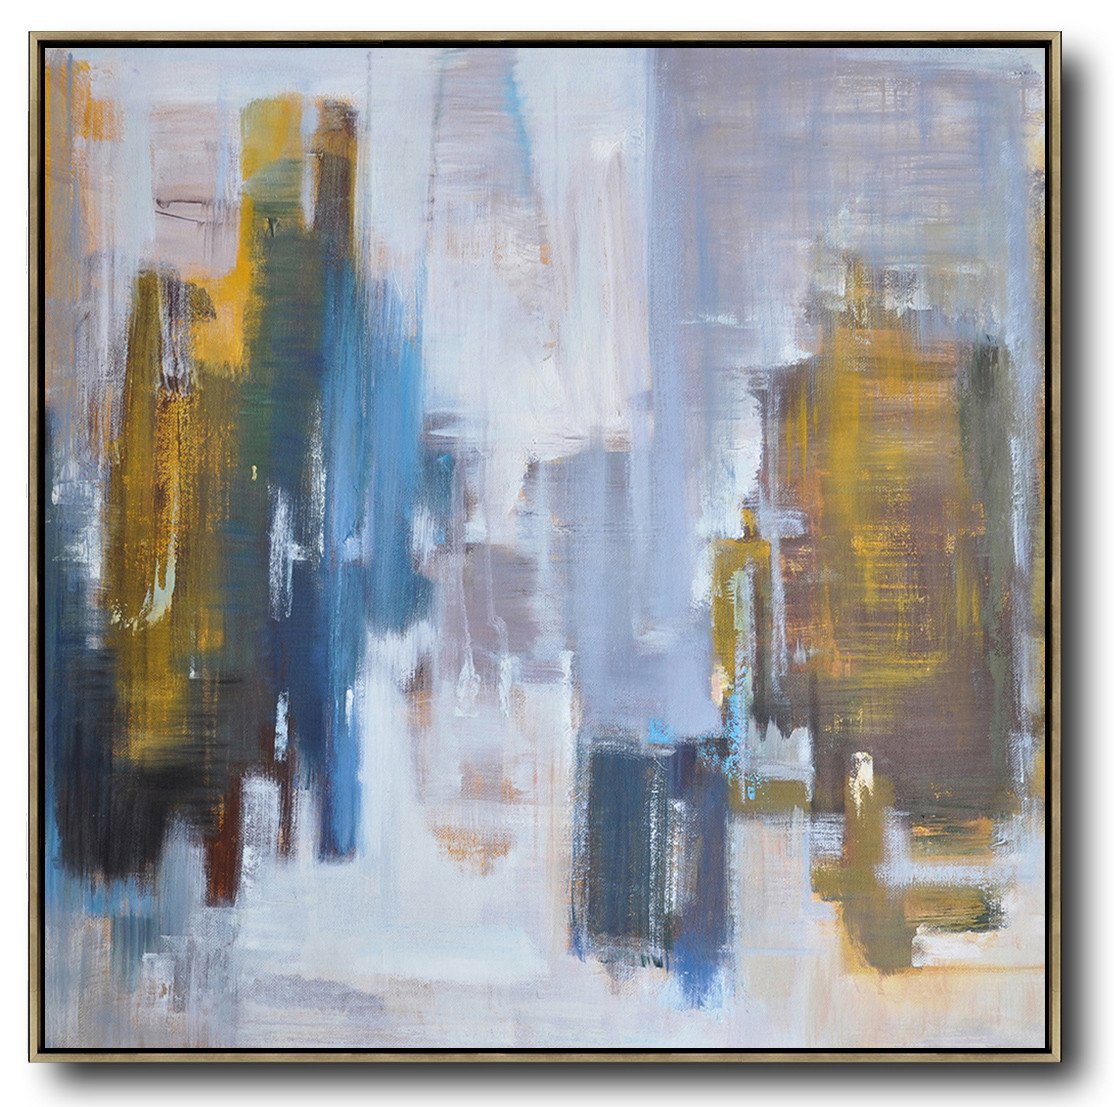 Large Abstract Painting Canvas Art,Oversized Abstract Landscape Oil Painting,Living Room Canvas Art,Yellow,White,Blue.etc